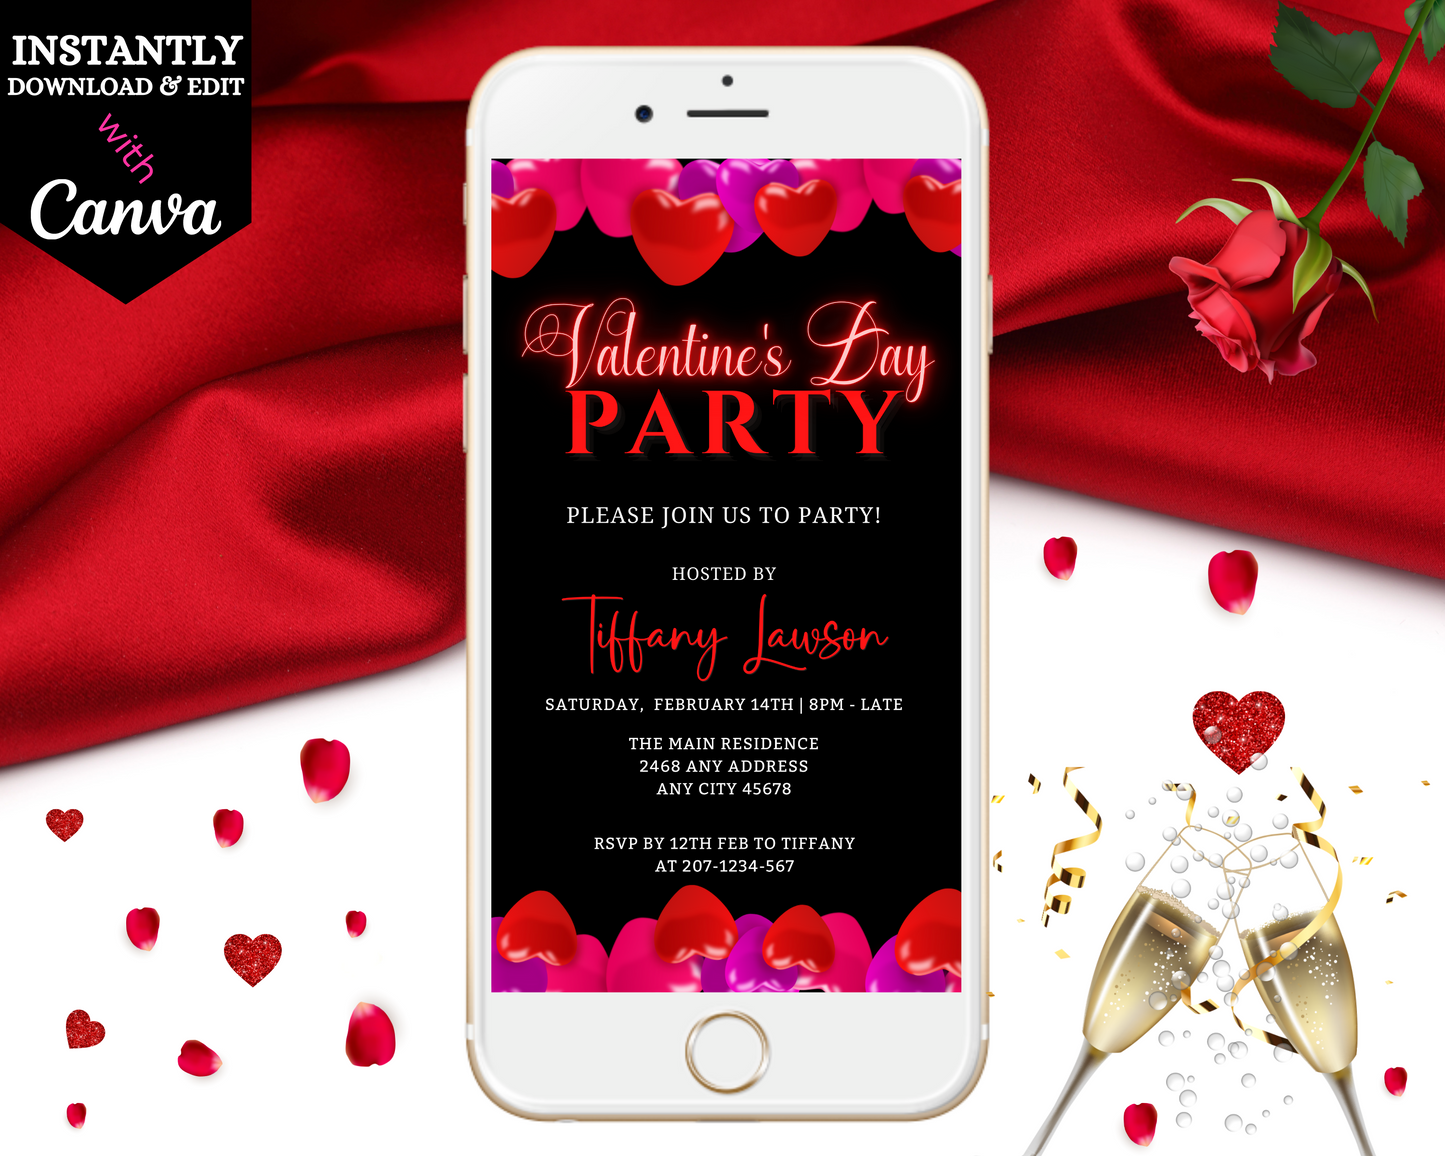 Smartphone displaying the Black Pink Red Hearts Valentines Party Evite template with red roses and confetti, ready for customization and digital sharing.